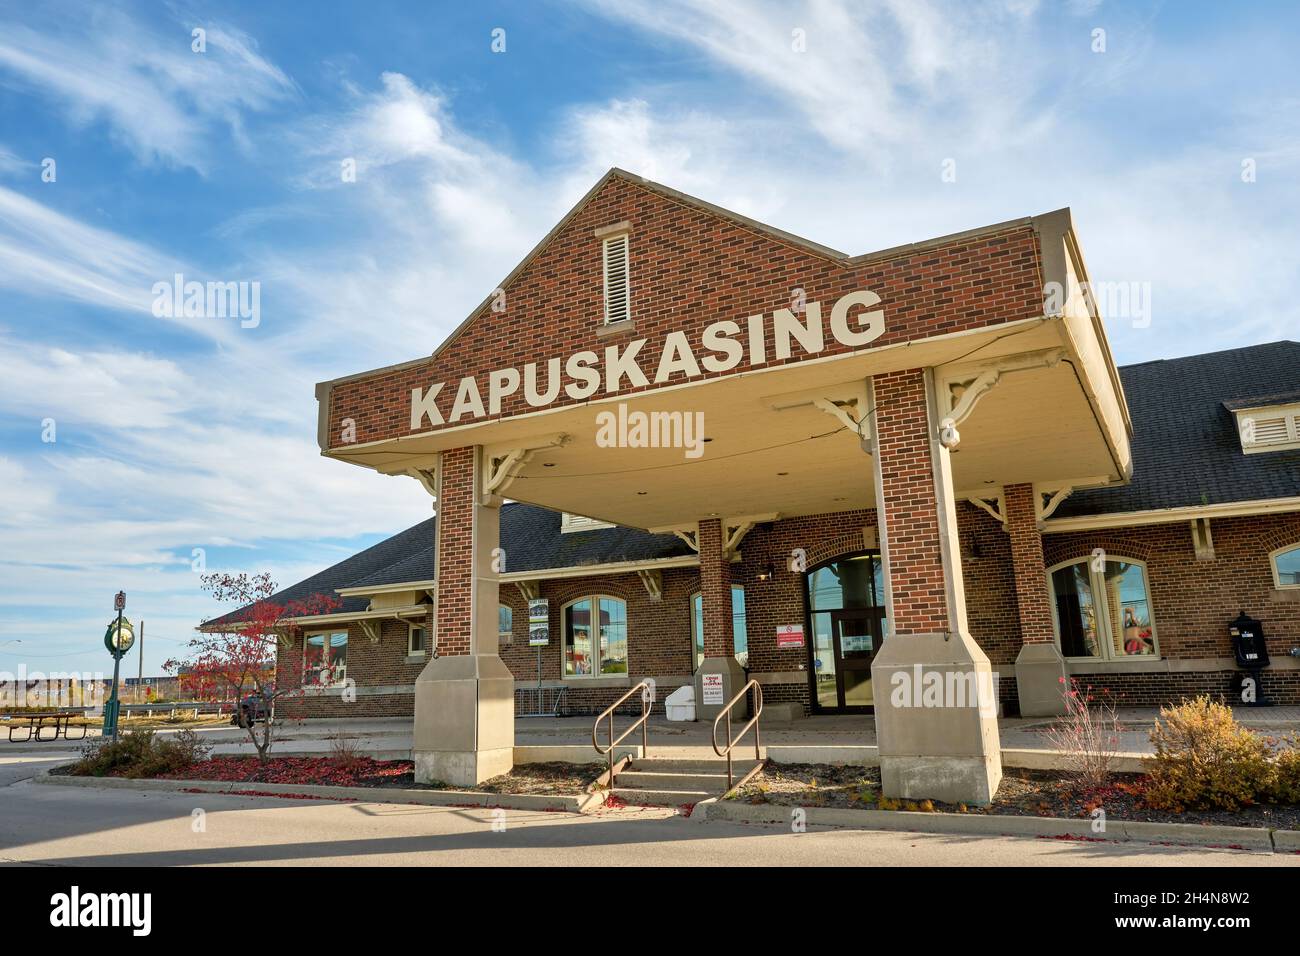 Kapuskasing is a town in Northern Ontario Canada. known for its pup and paper industry. Stock Photo